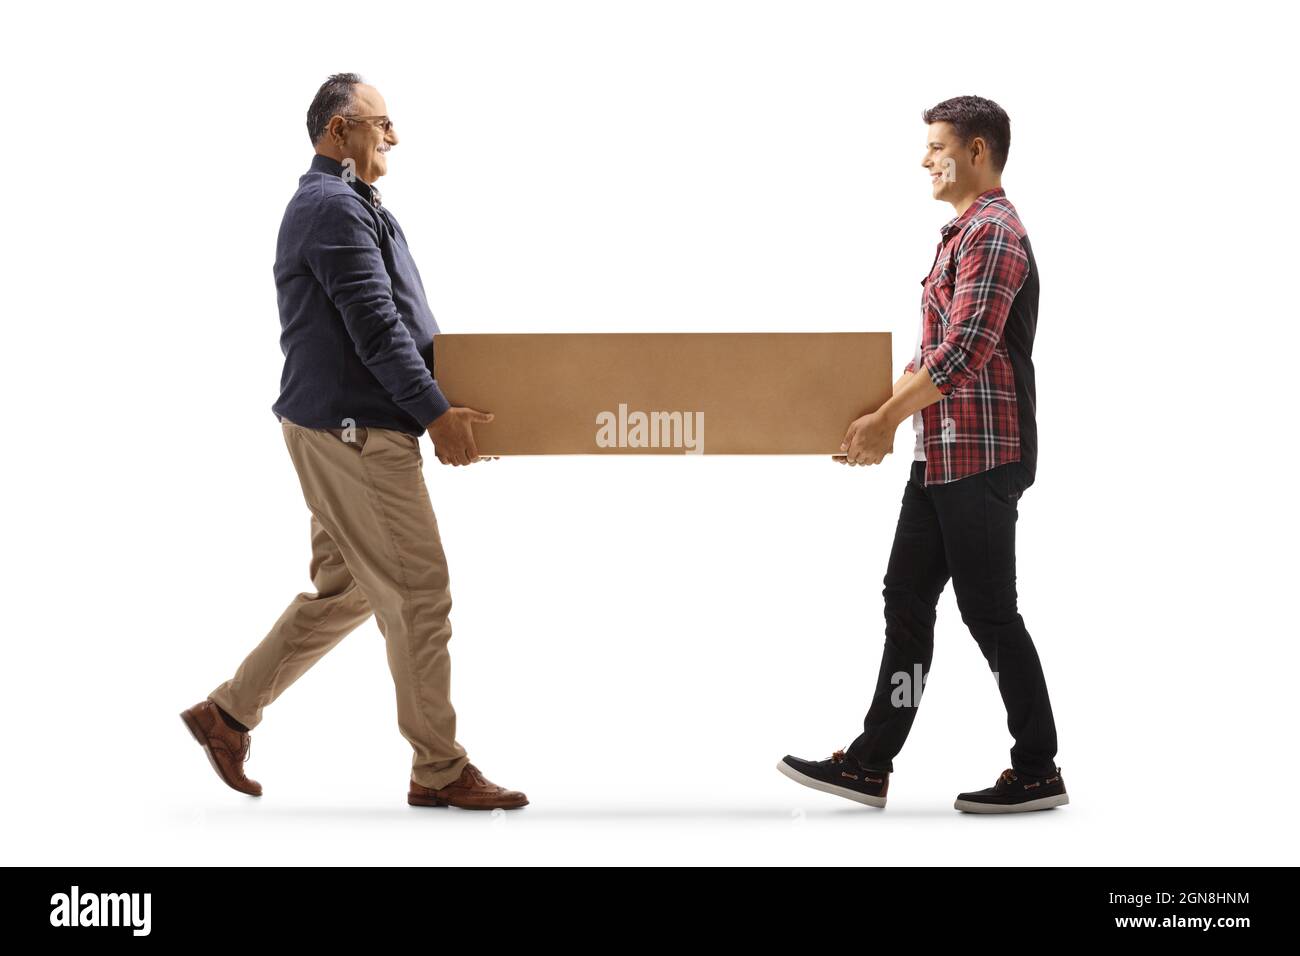 Father and son carrying a cardboard box isolated on white background Stock Photo